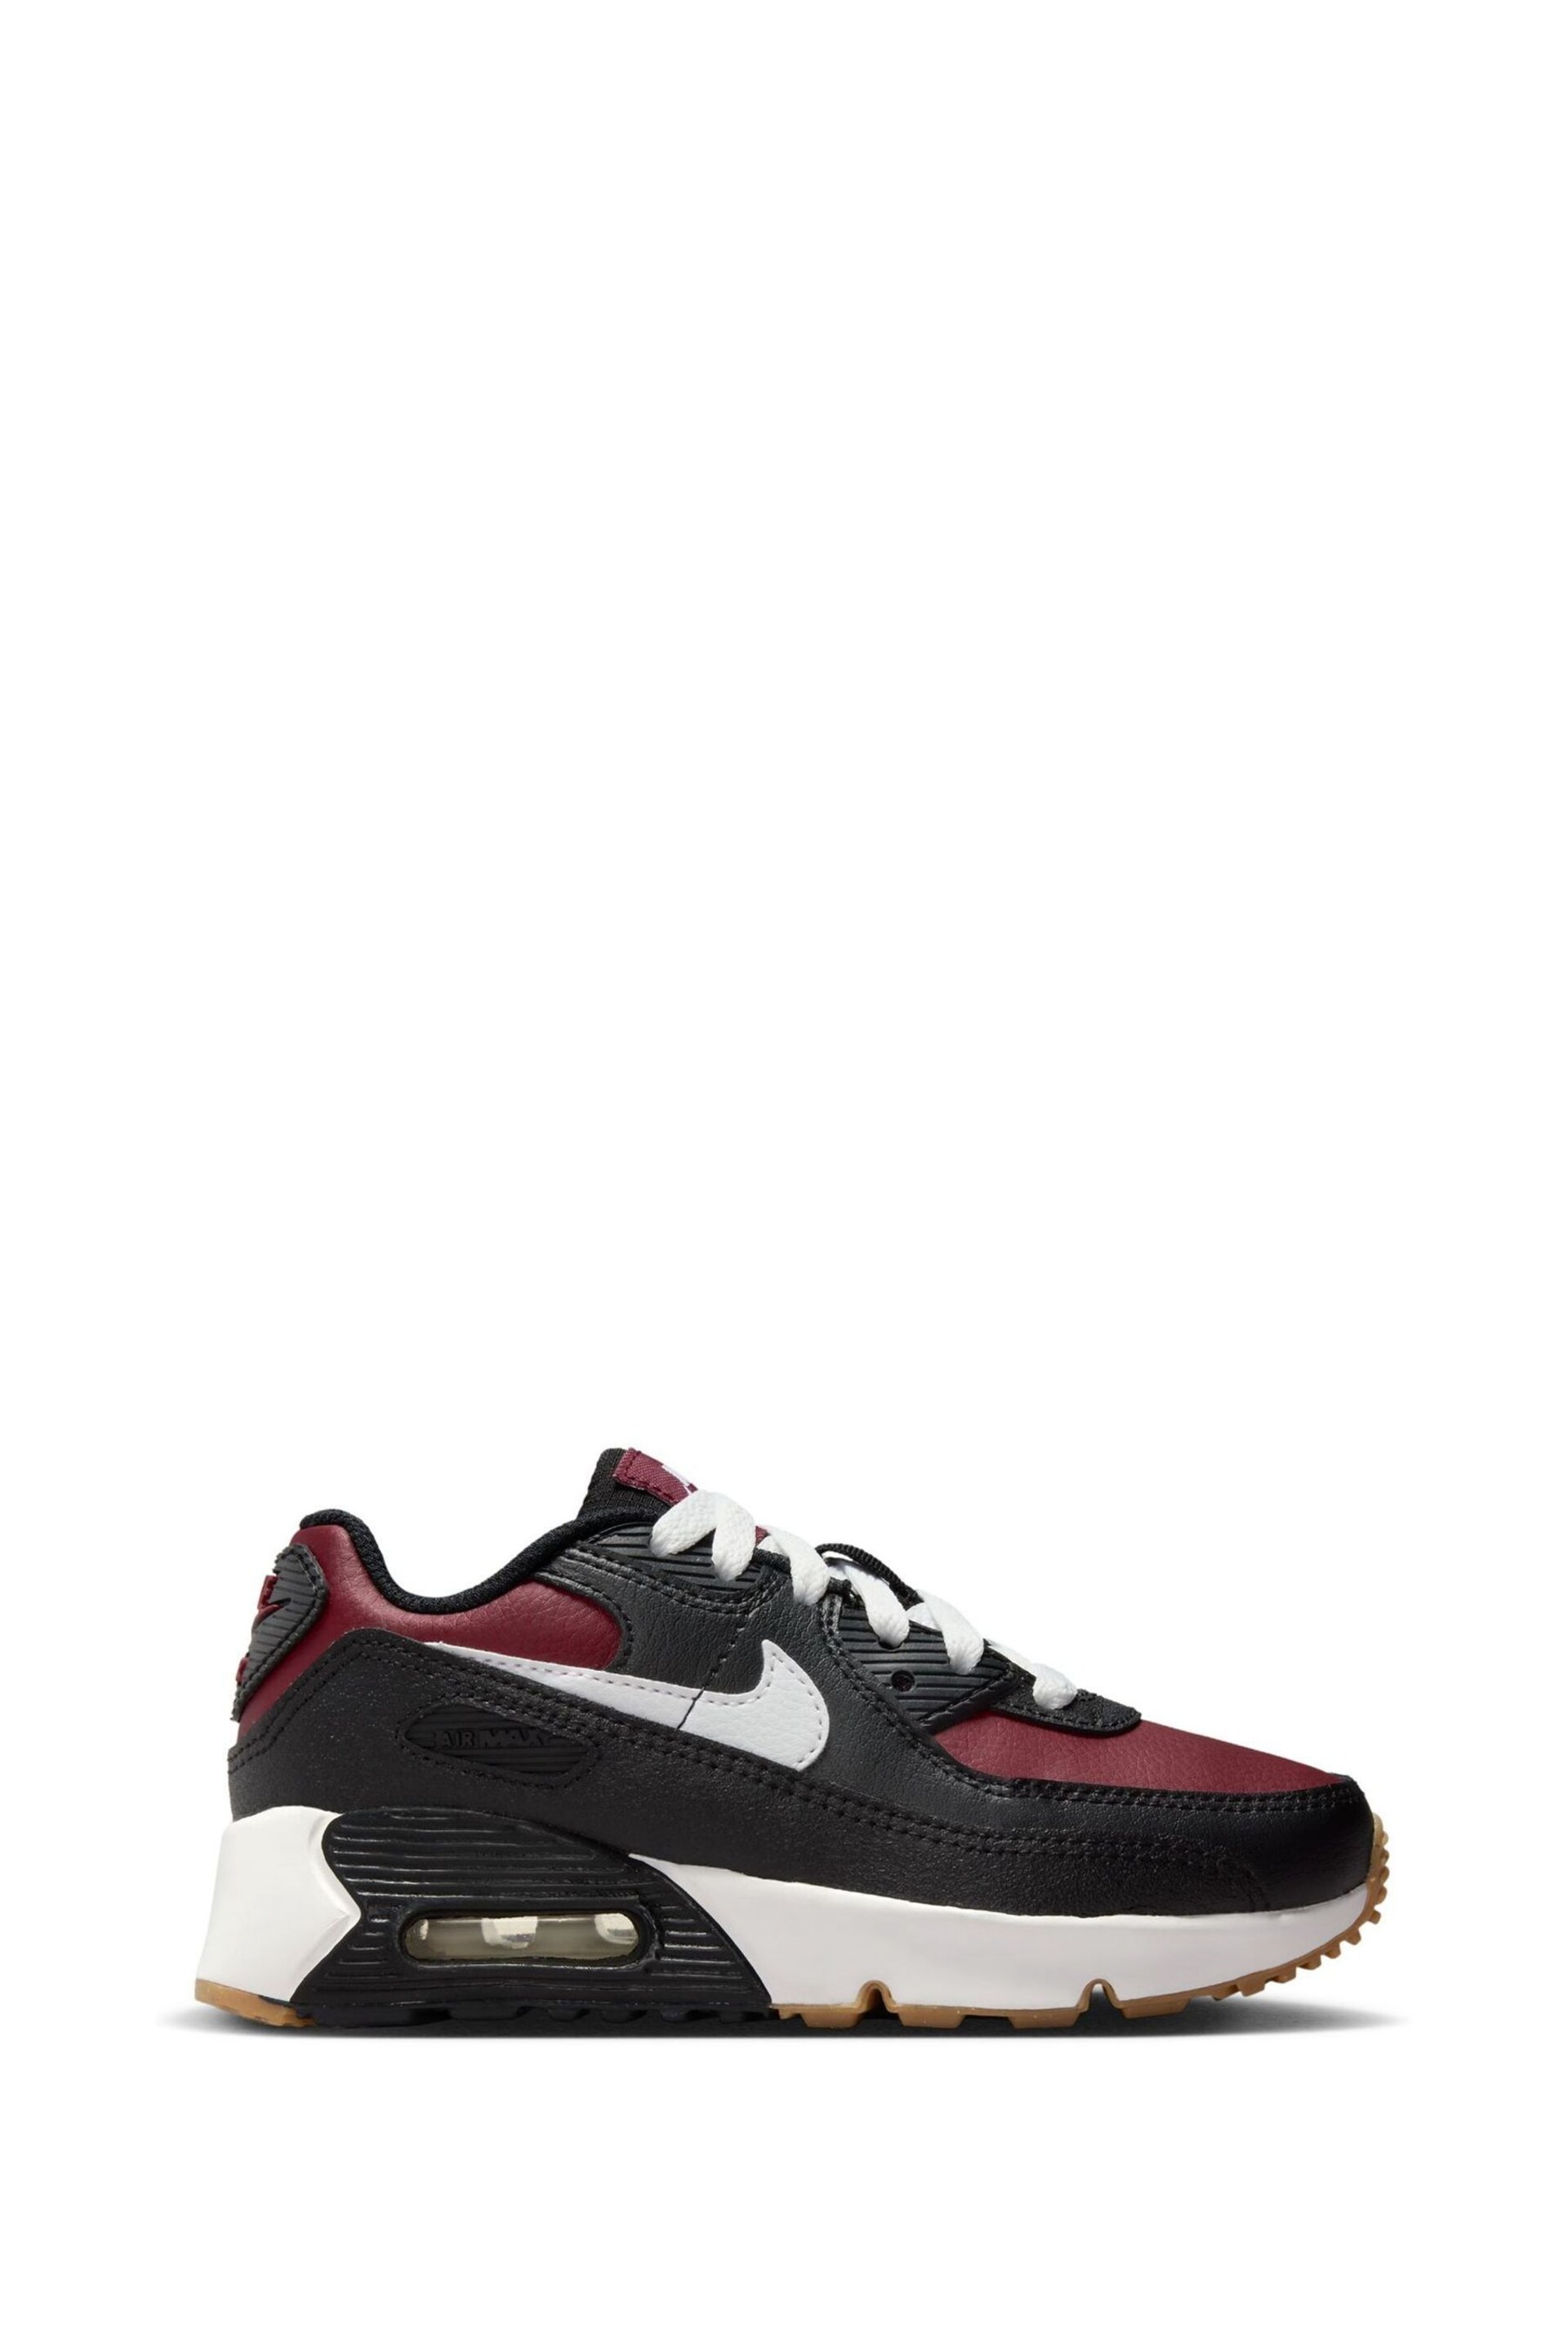 Nike Black/White/Red Air Max 90 Junior Trainers - Image 1 of 8